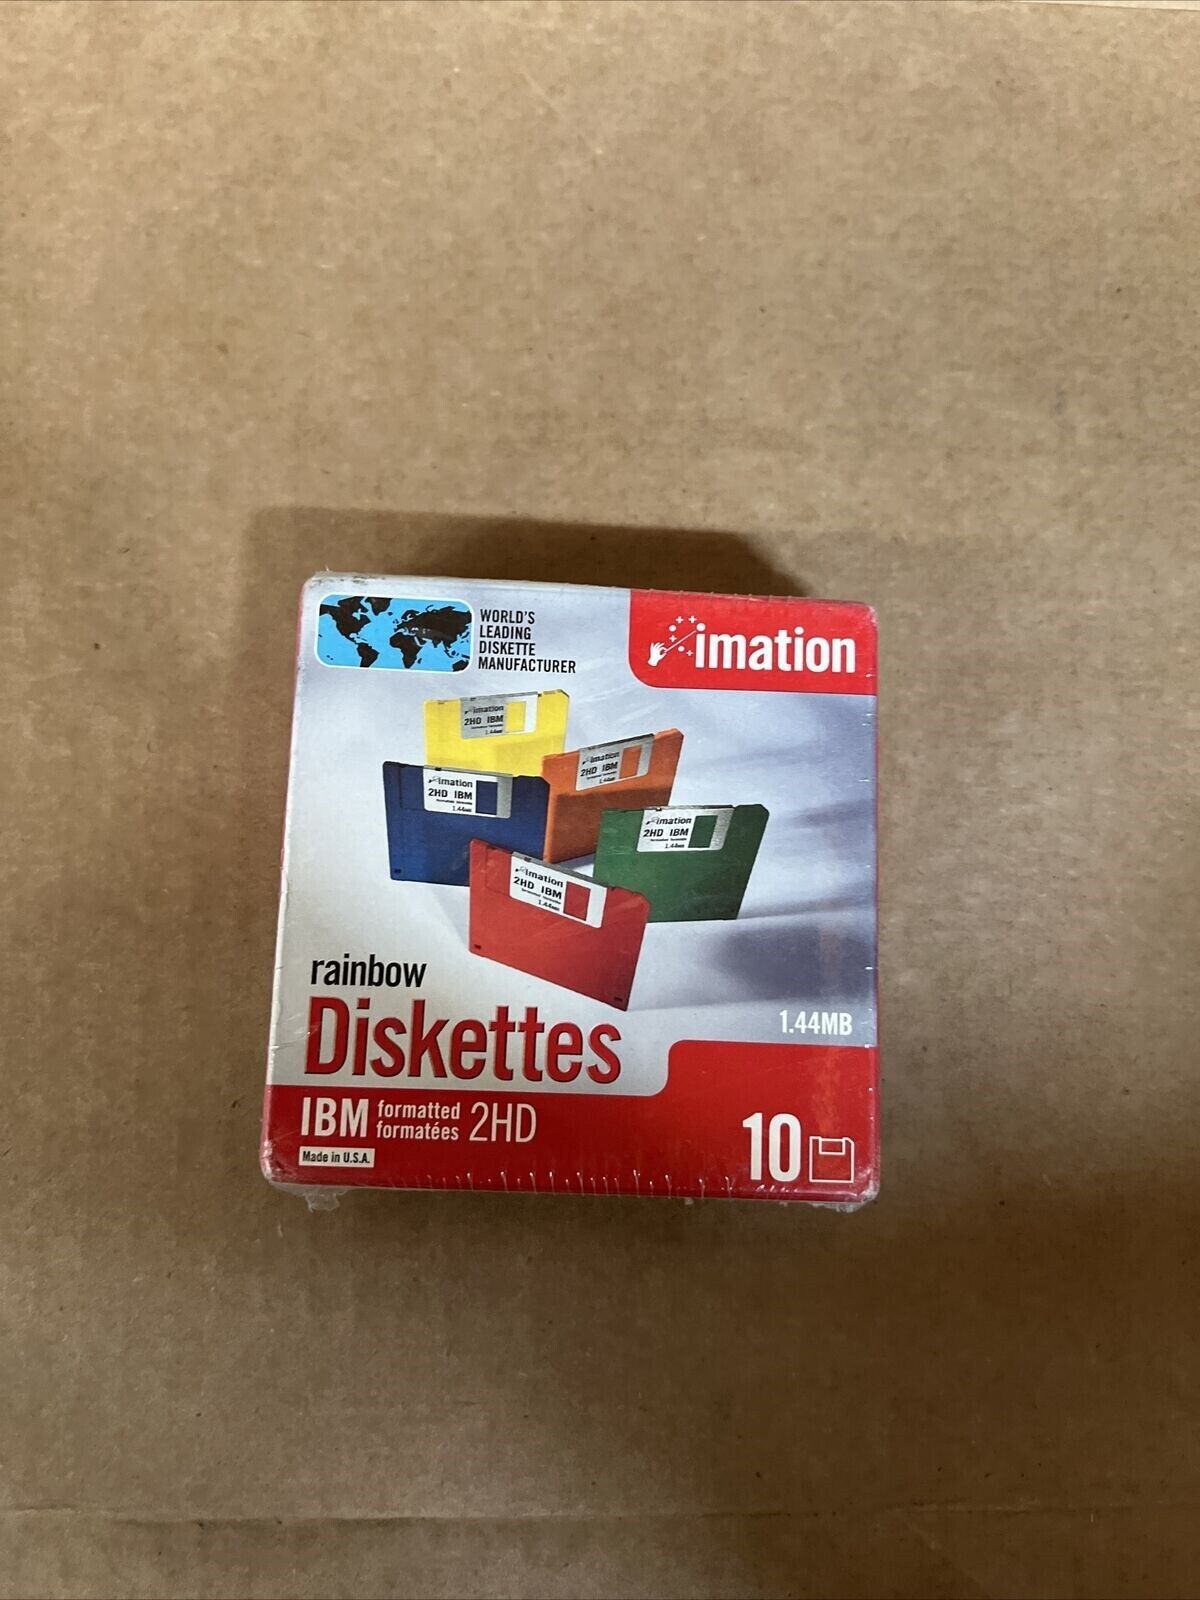 New Sealed 10 Pack Imation IBM Formatted 1.44 MB Rainbow Diskettes